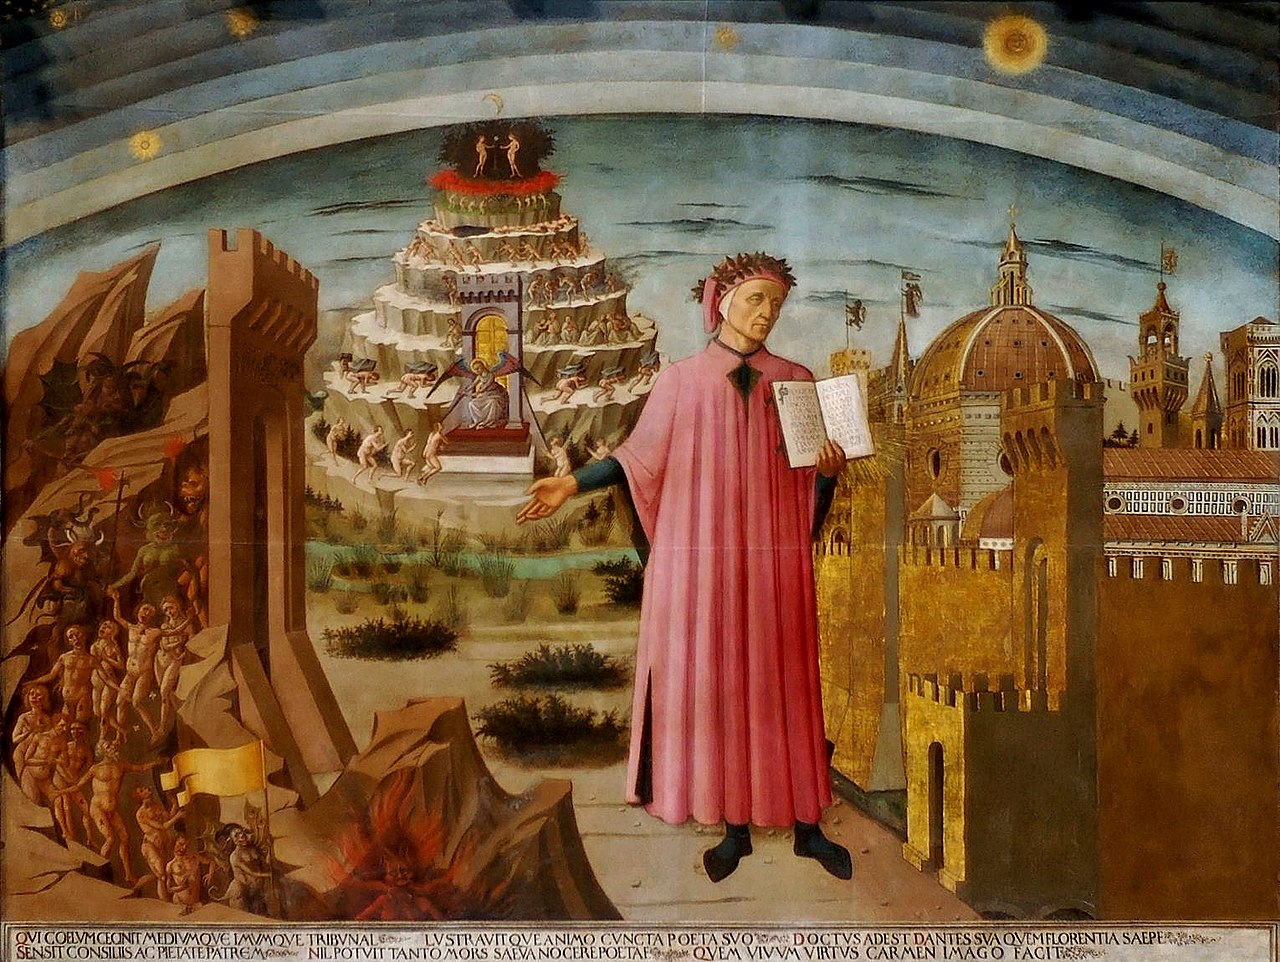 Shahrazad's Tale and Dante's Inferno